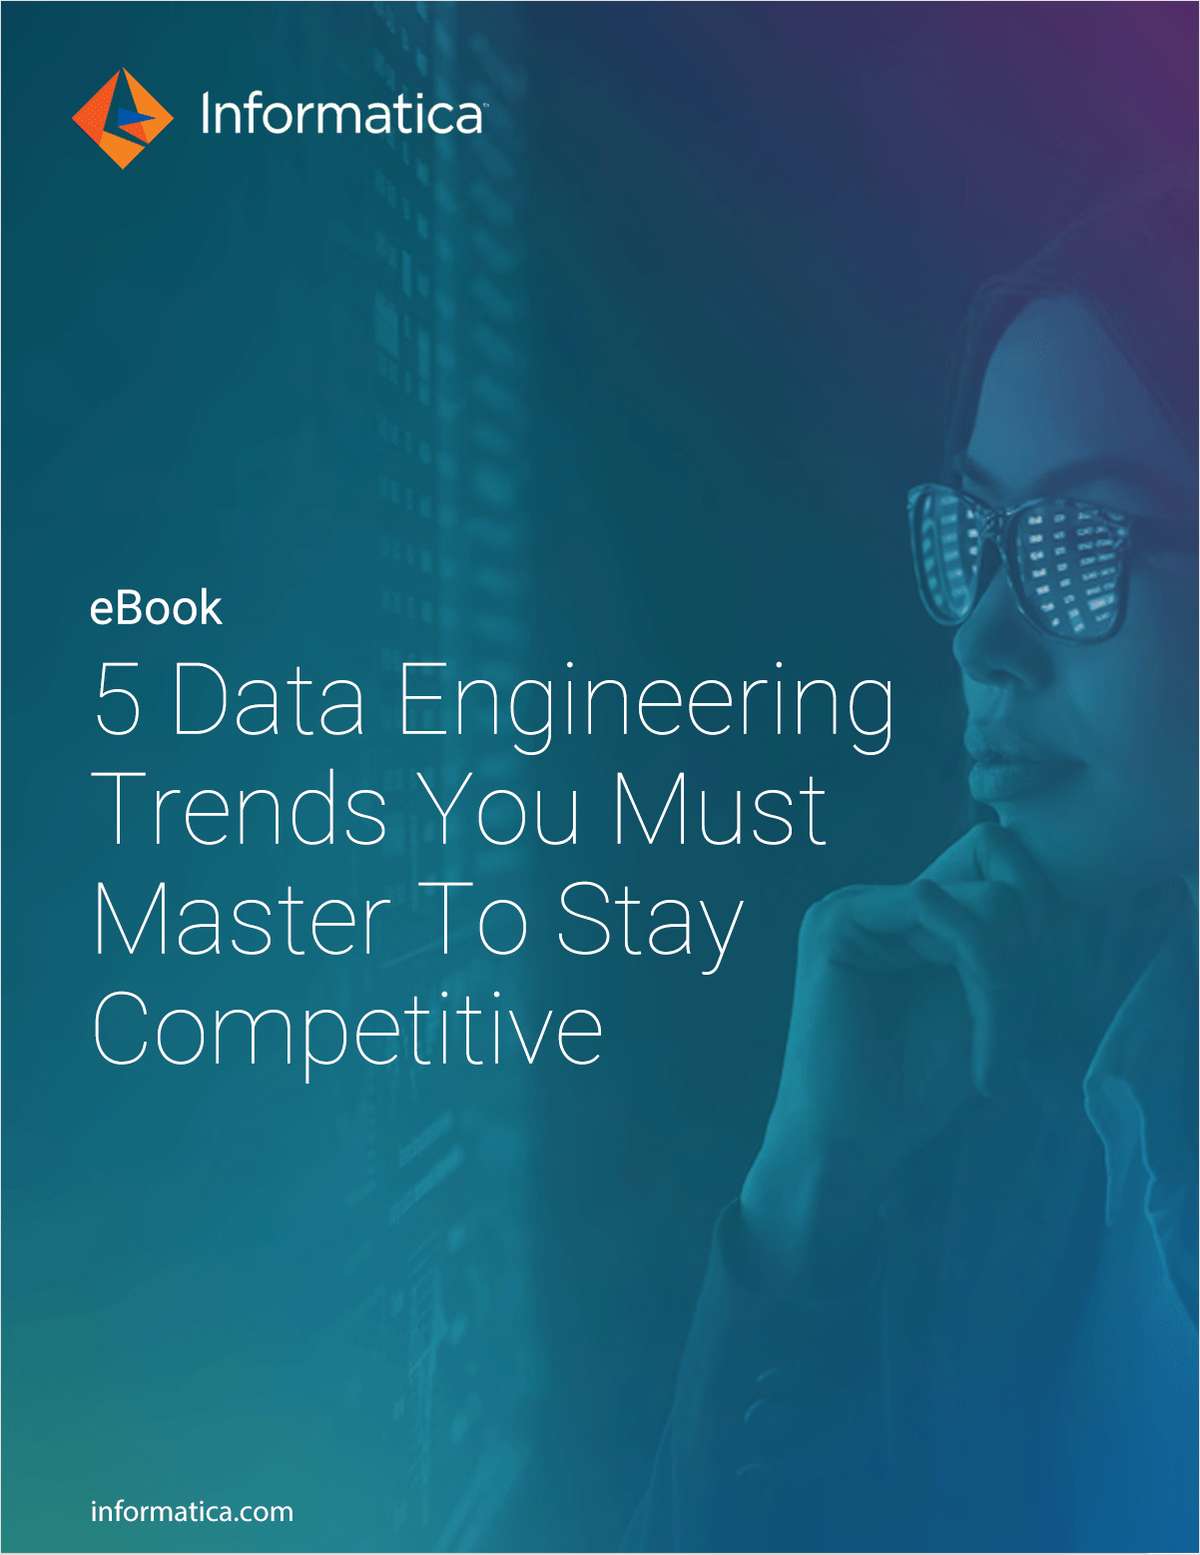 Master These 5 Data Engineering Trends to Beat Your Competition